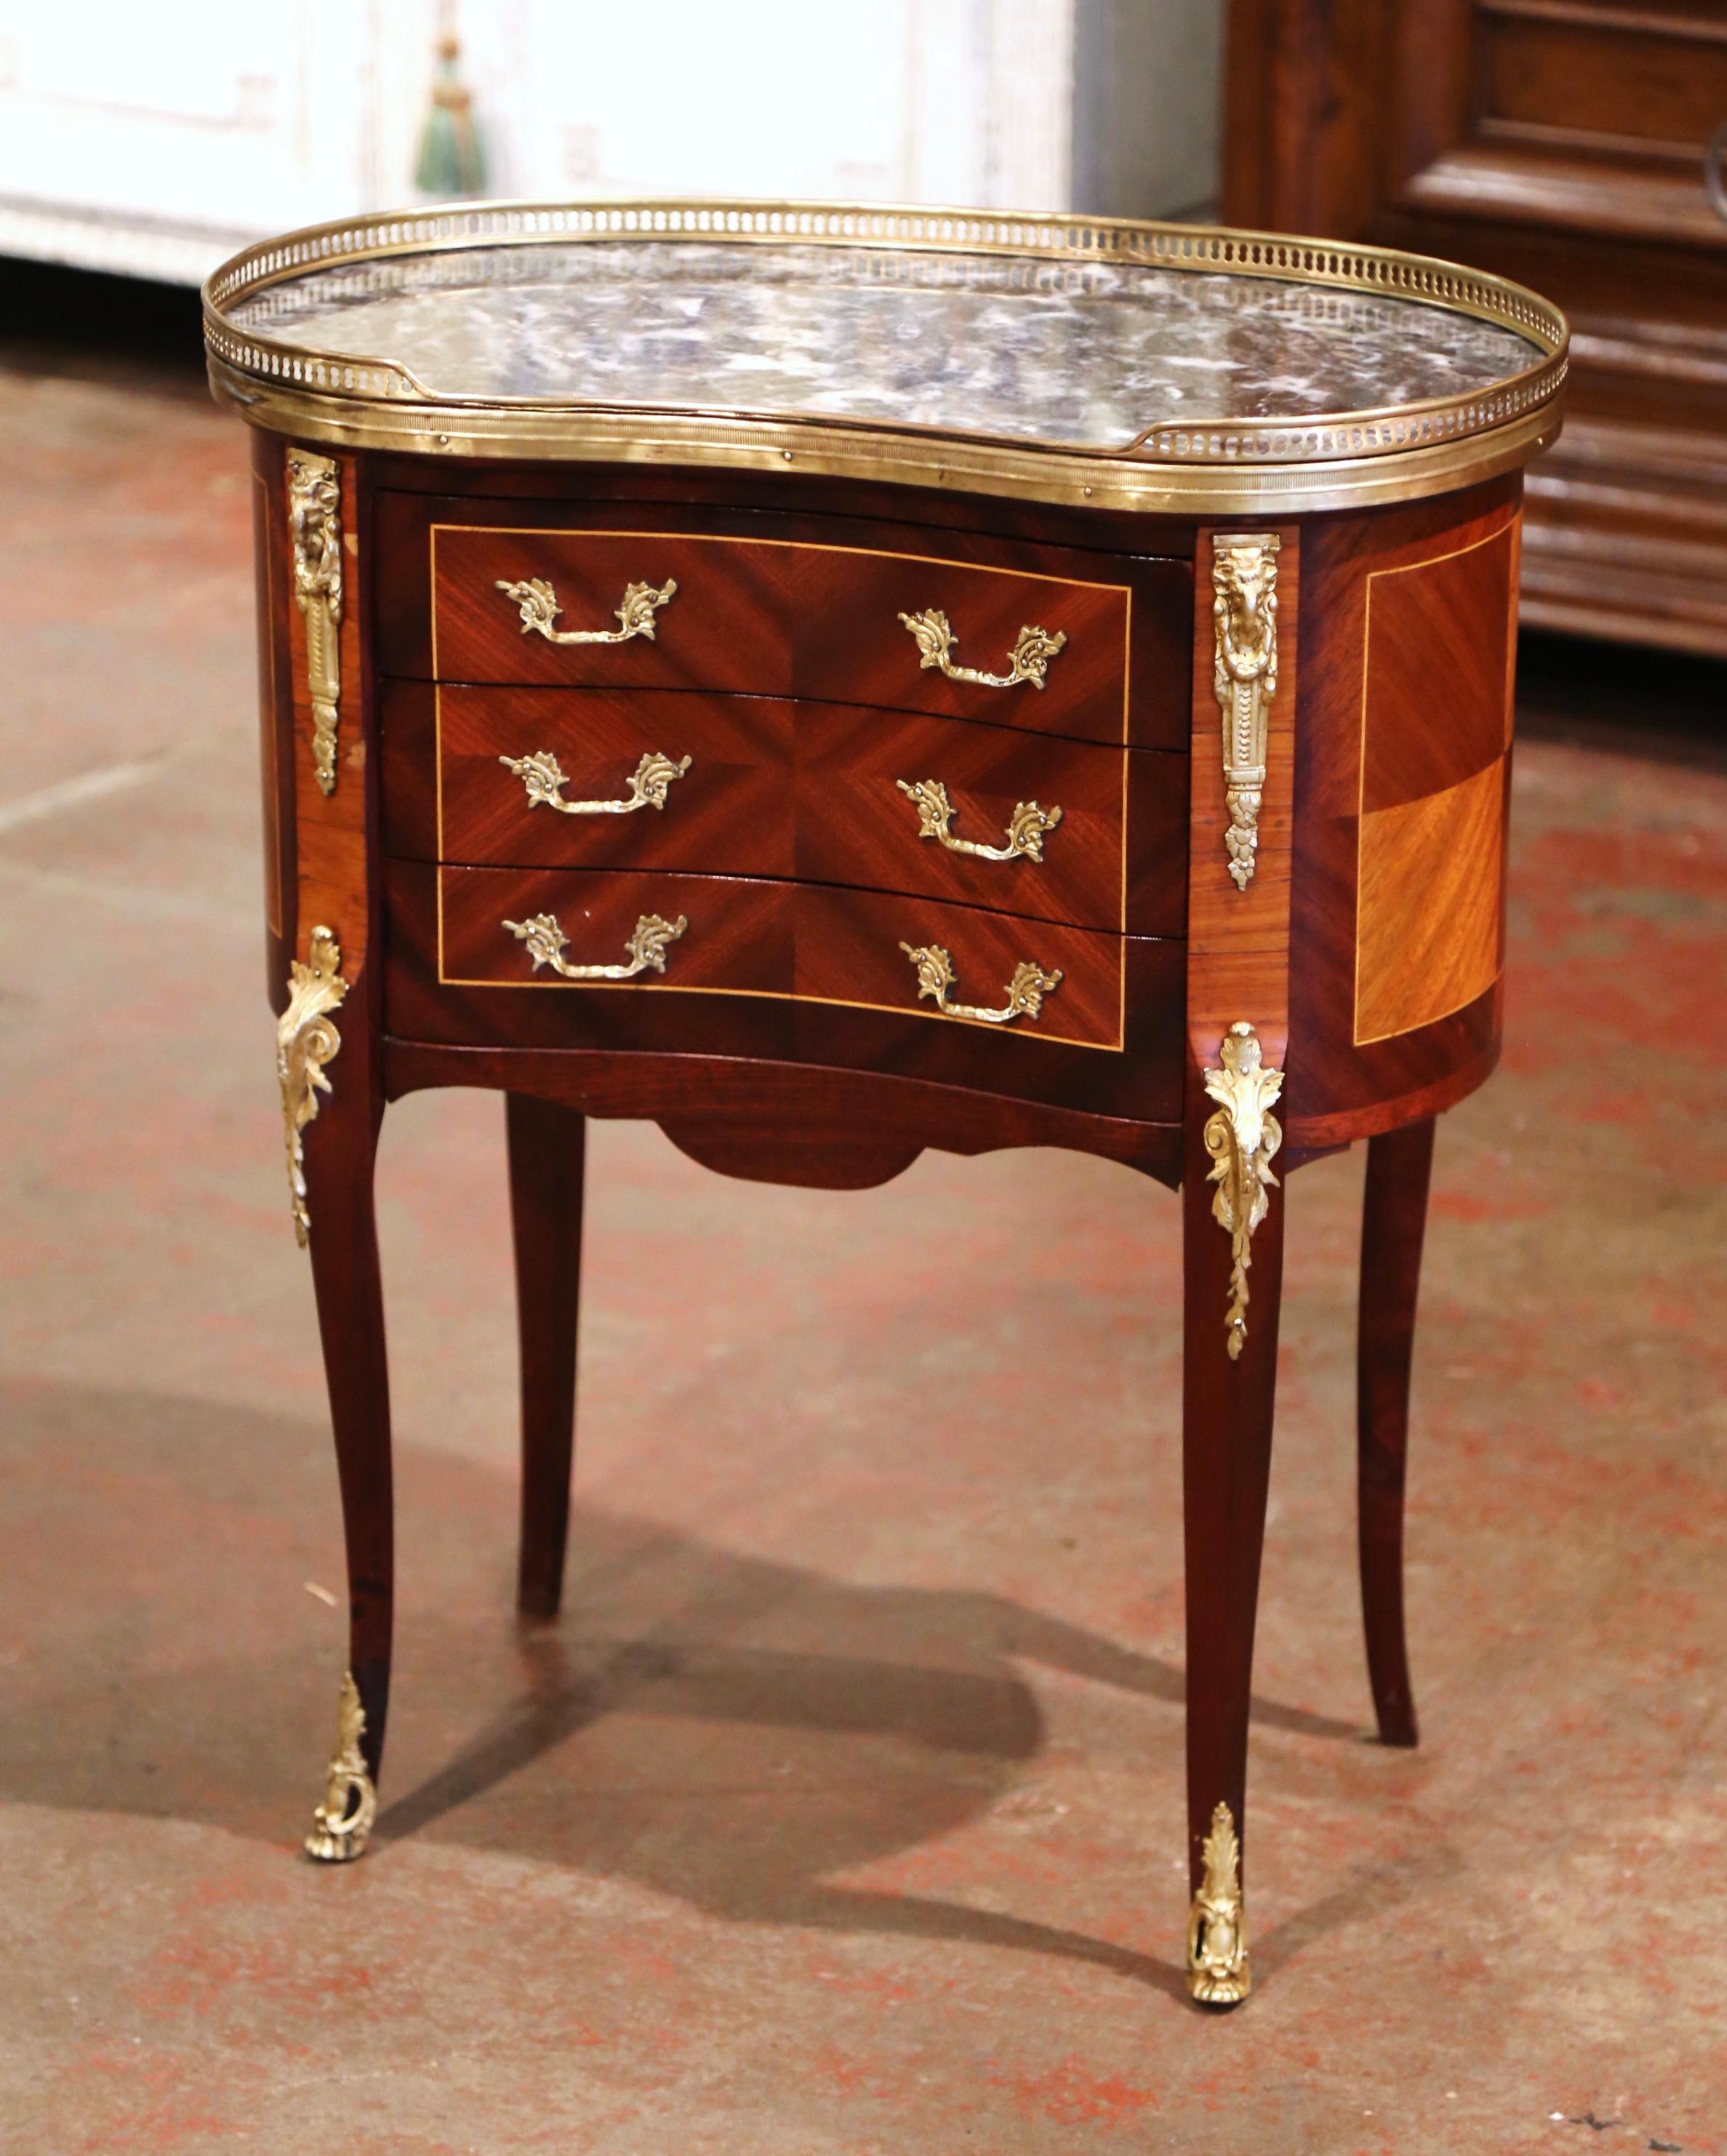 This elegant, kidney-shaped fruitwood antique chest was crafted in Paris, circa 1950. The petite commode sits on cabriole legs decorated with acanthus leaf mounts at the shoulder, and ending with brass sabot feet; it features three drawers across